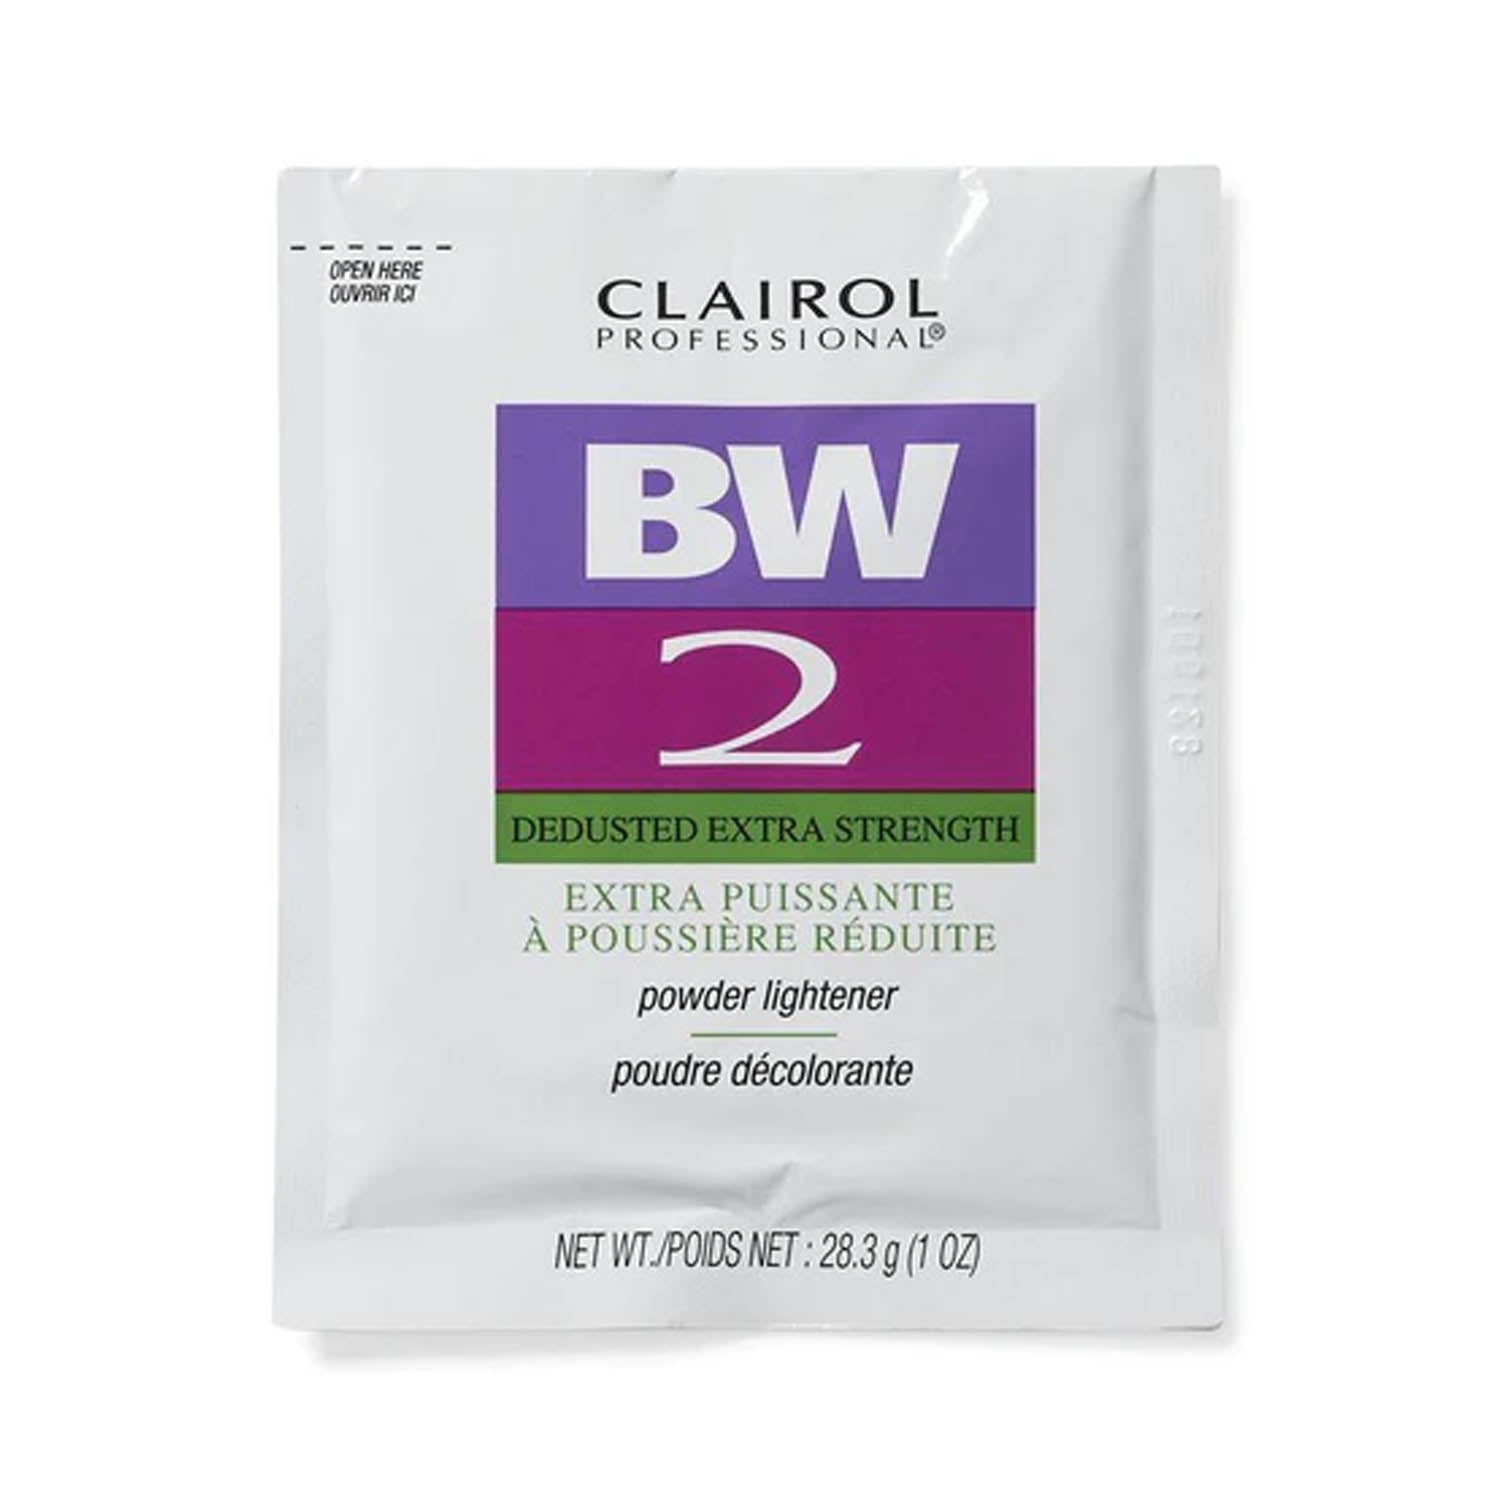 CLAIROL BW2 PWDR LT PAC (1)